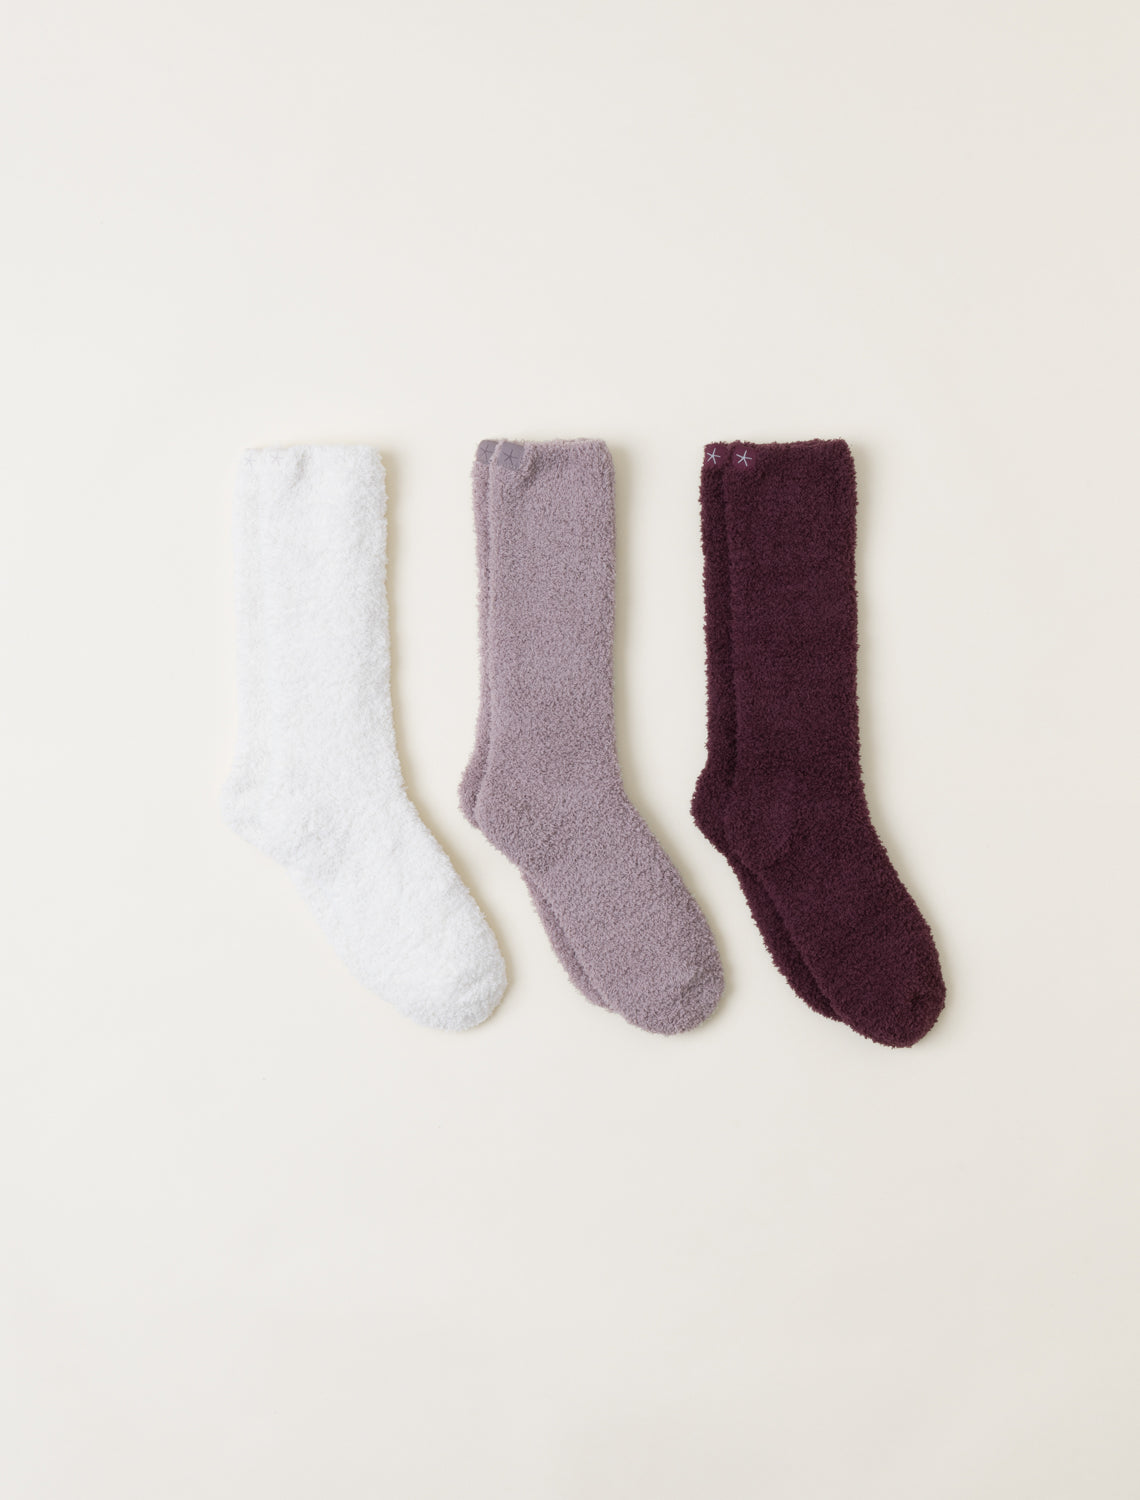 Enter Sock Dreams utopia: where socks are the gateway to body positivity! •  Offbeat Home & Life